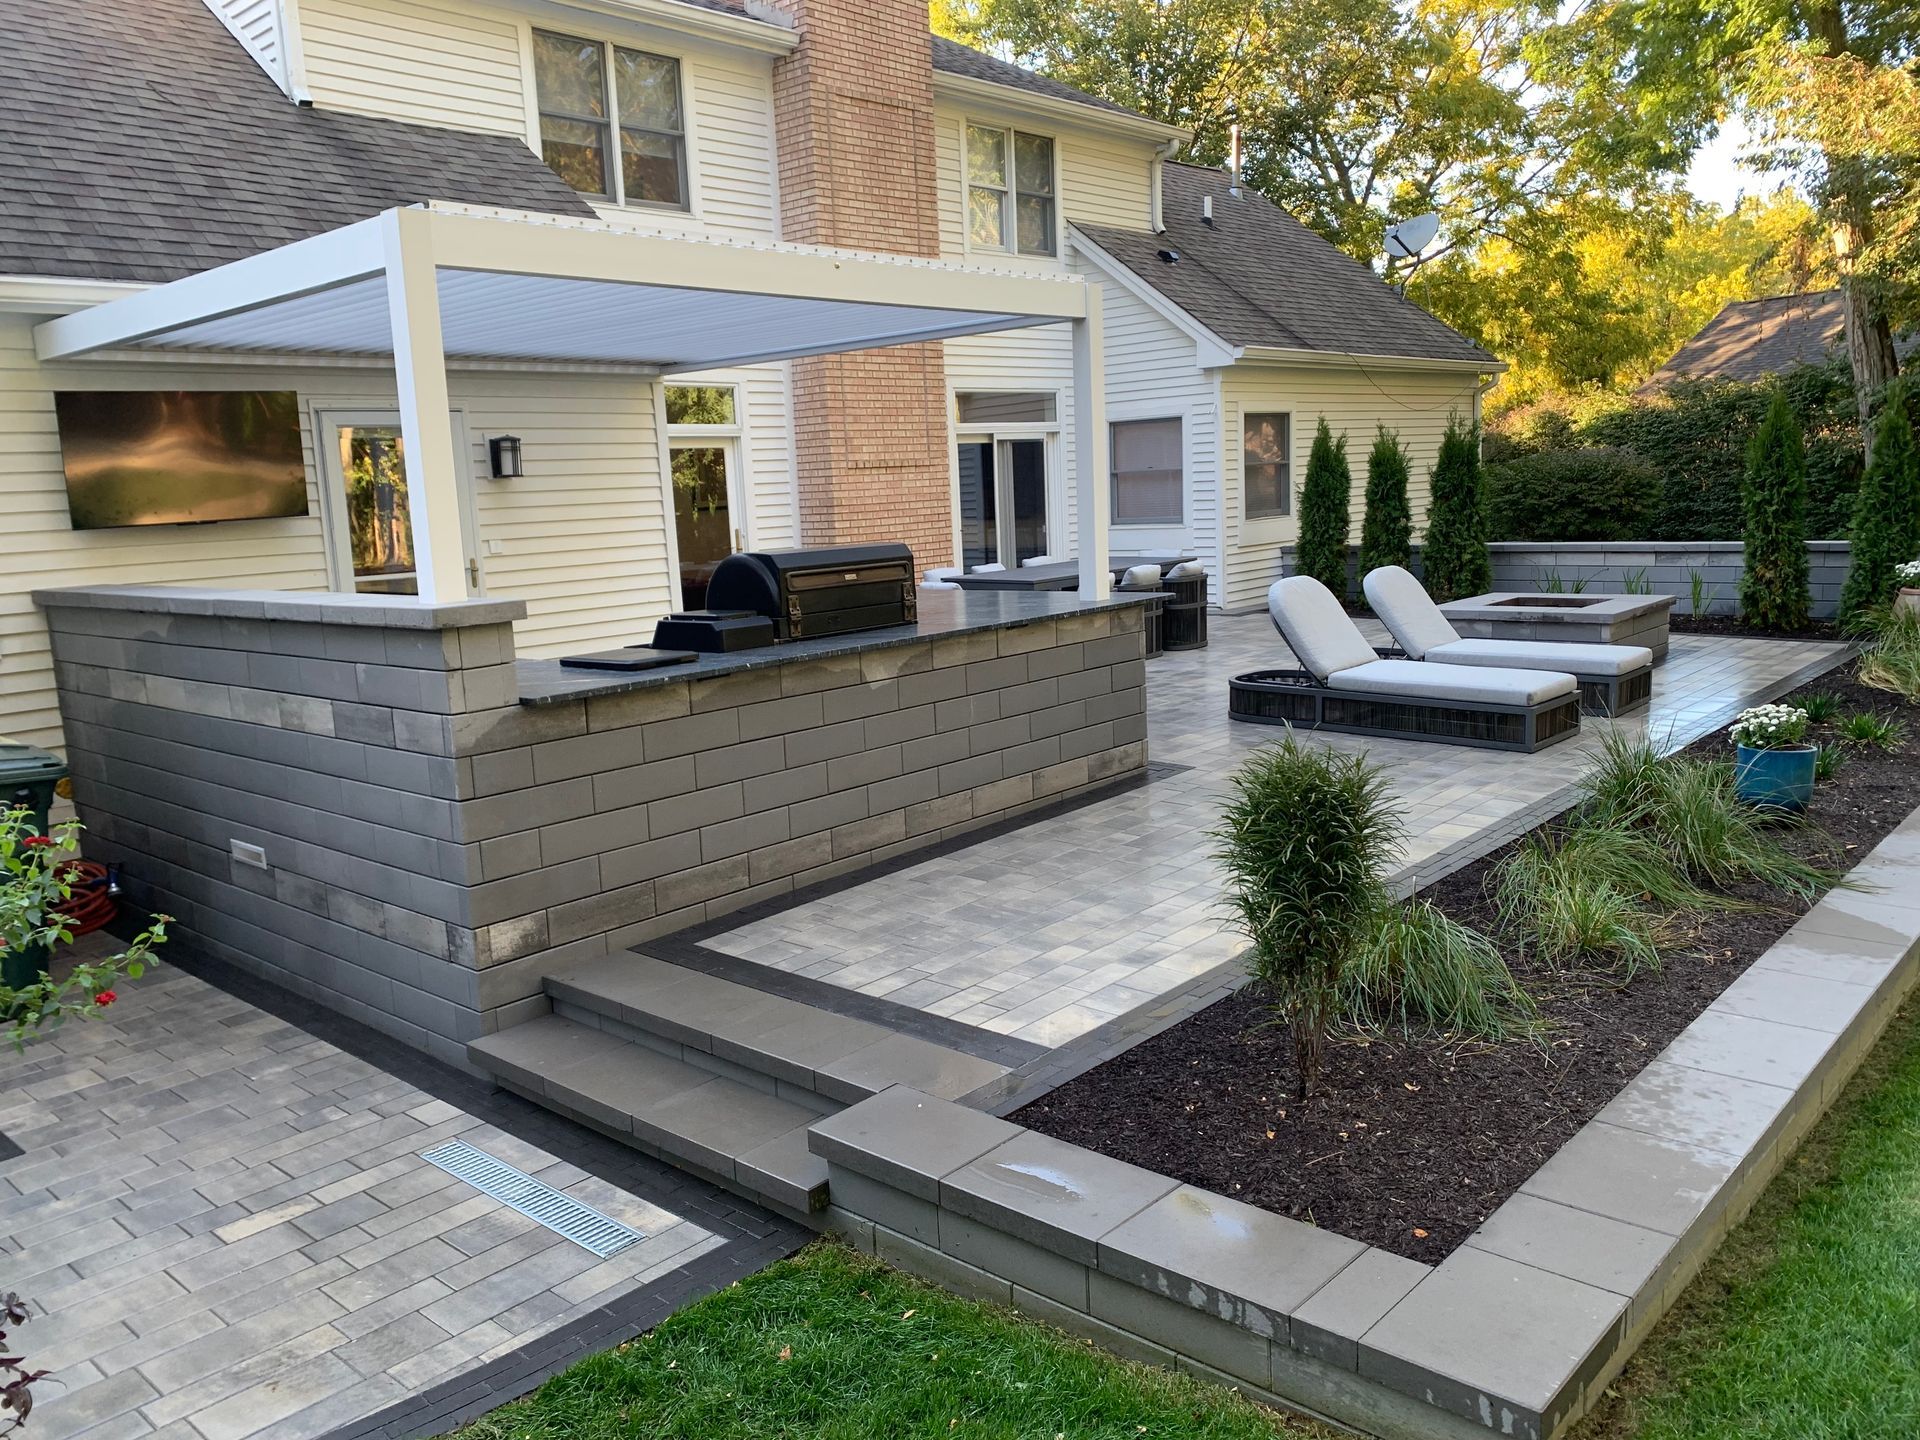 Retaining Walls in Outdoor Living Space at Valparaiso, IN property